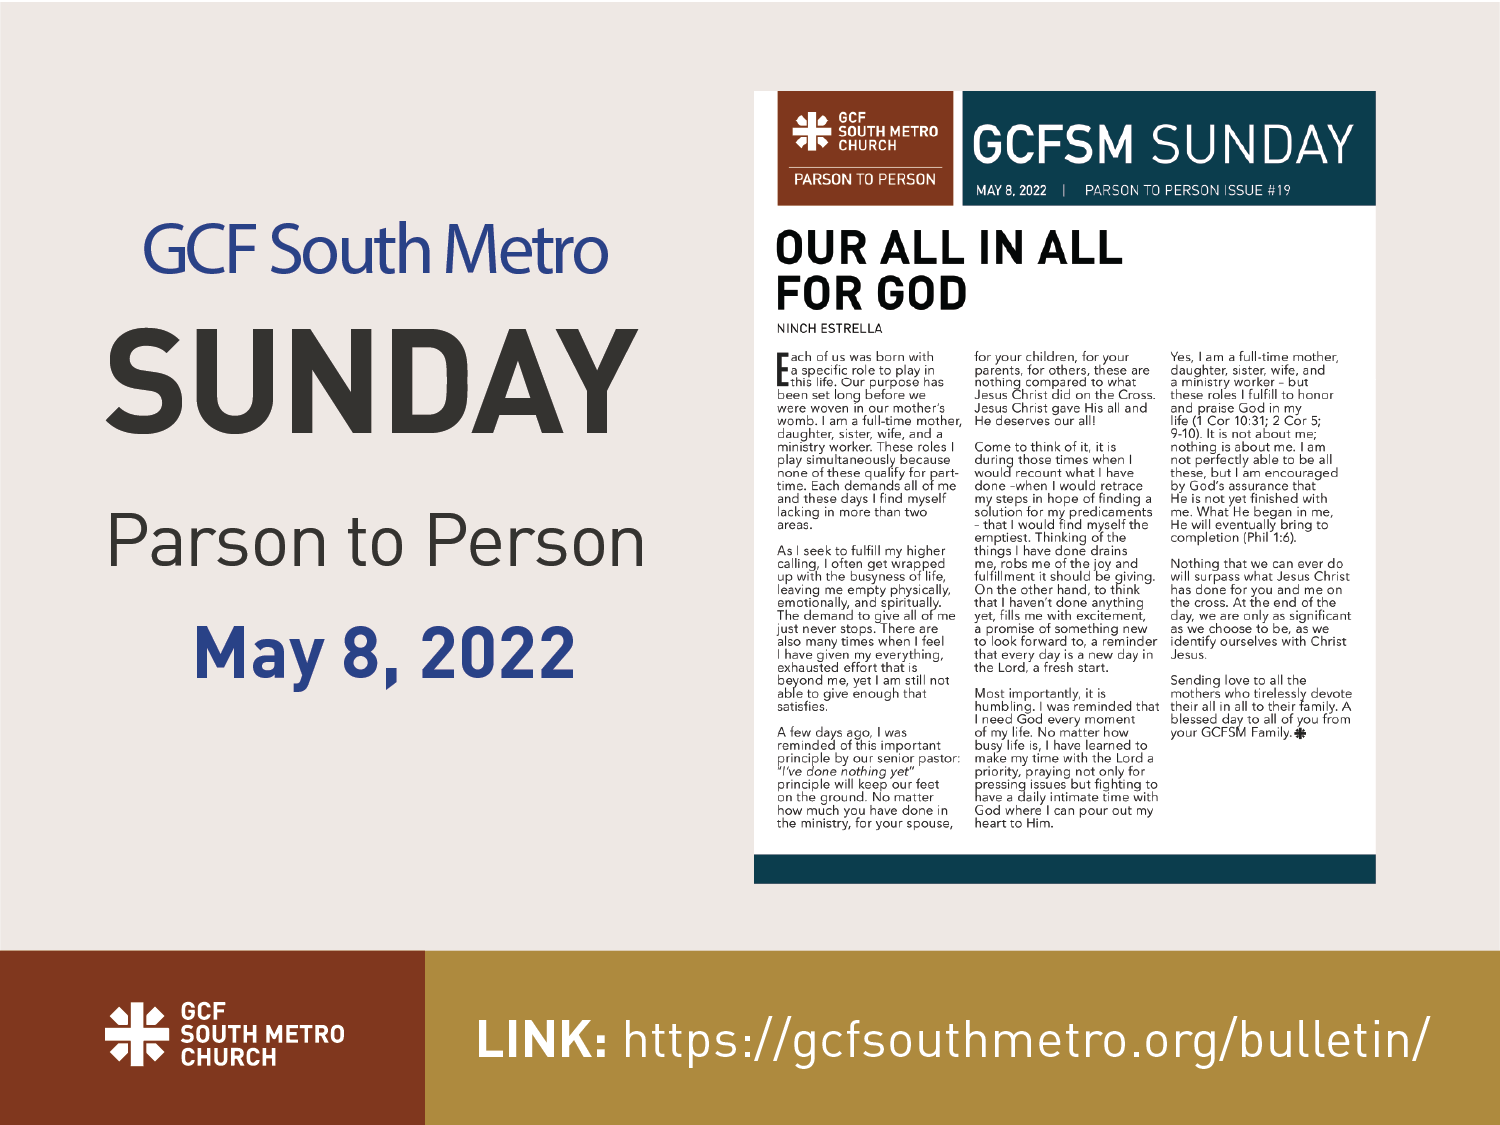 Sunday Bulletin – Parson to Person, May 8, 2022